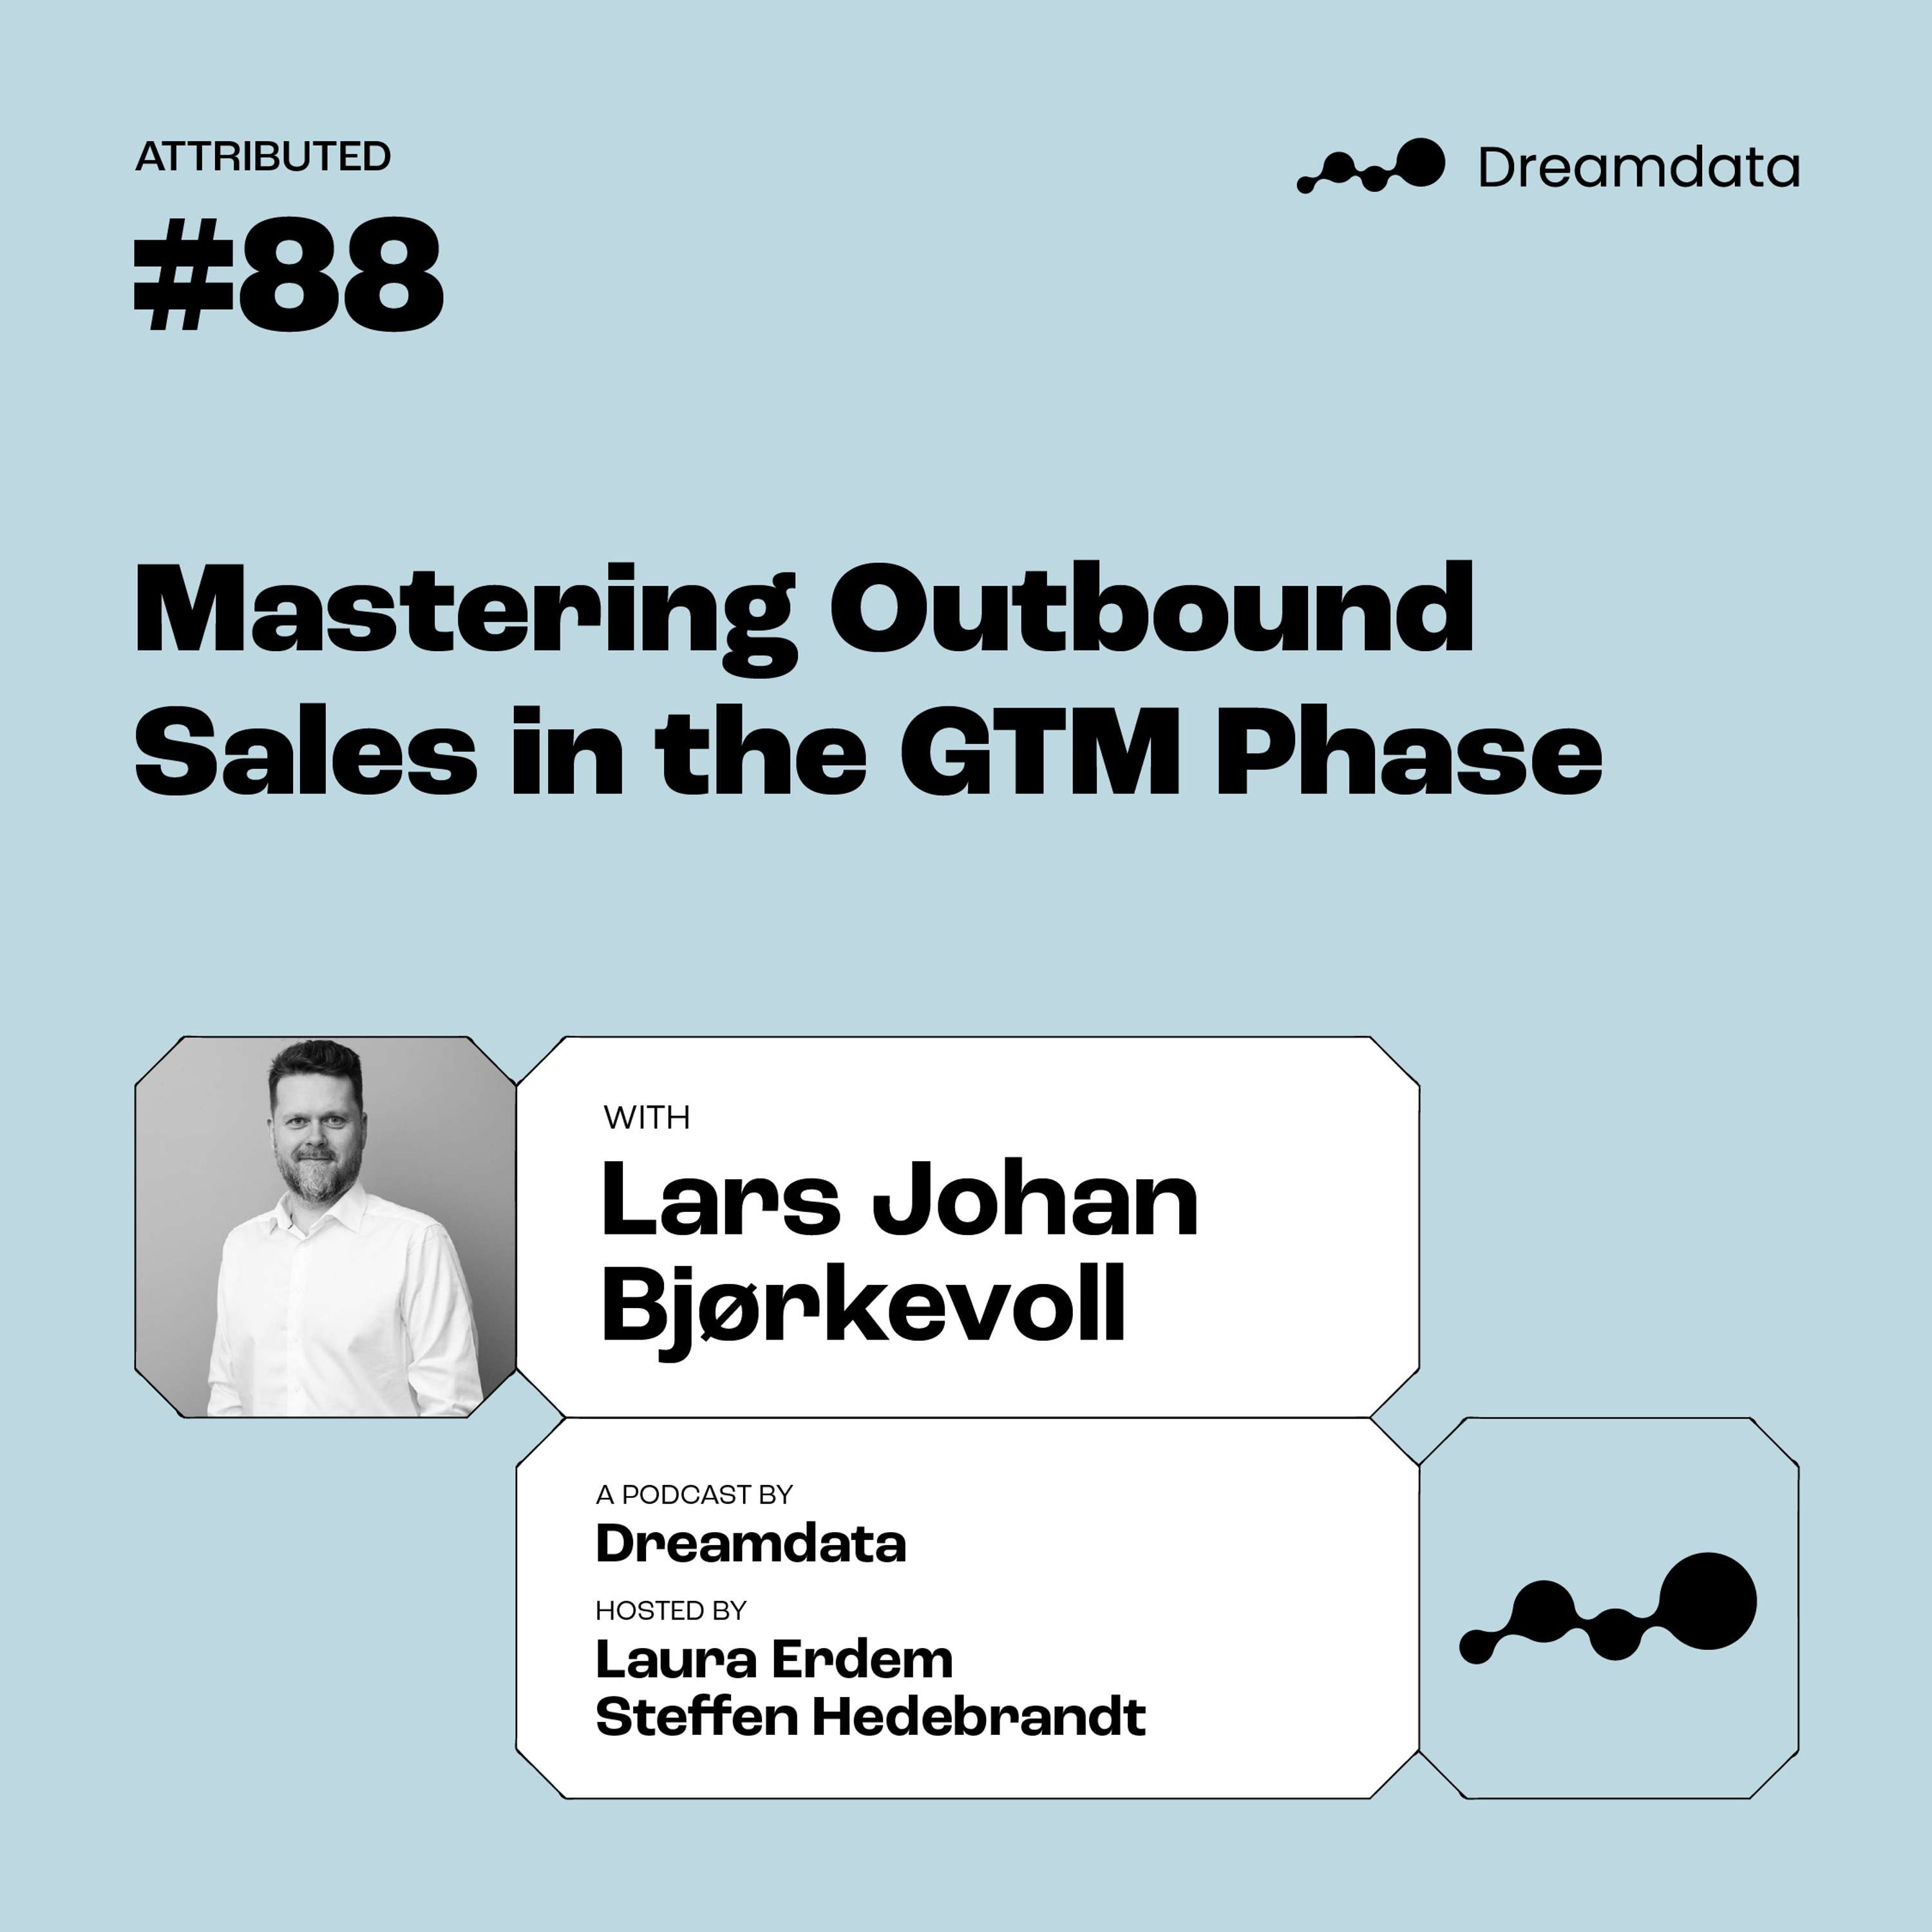 Lars Johan Bjørkevoll : Mastering Outbound Sales in the GTM Phase